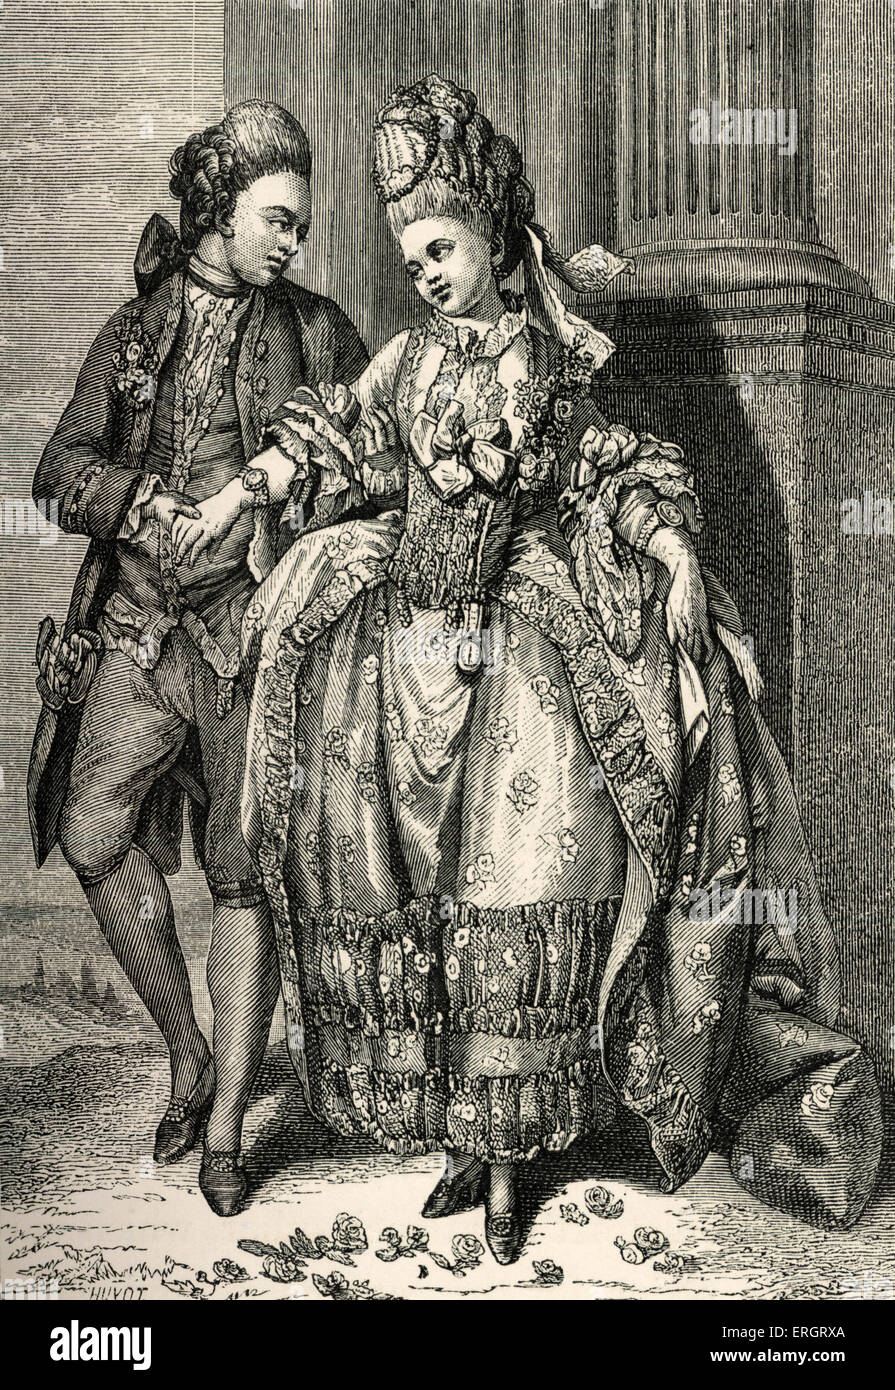 French bourgeois couple of newly-weds wearing 18th century fashion / costume. Rise of the middle class, aspirations to Stock Photo